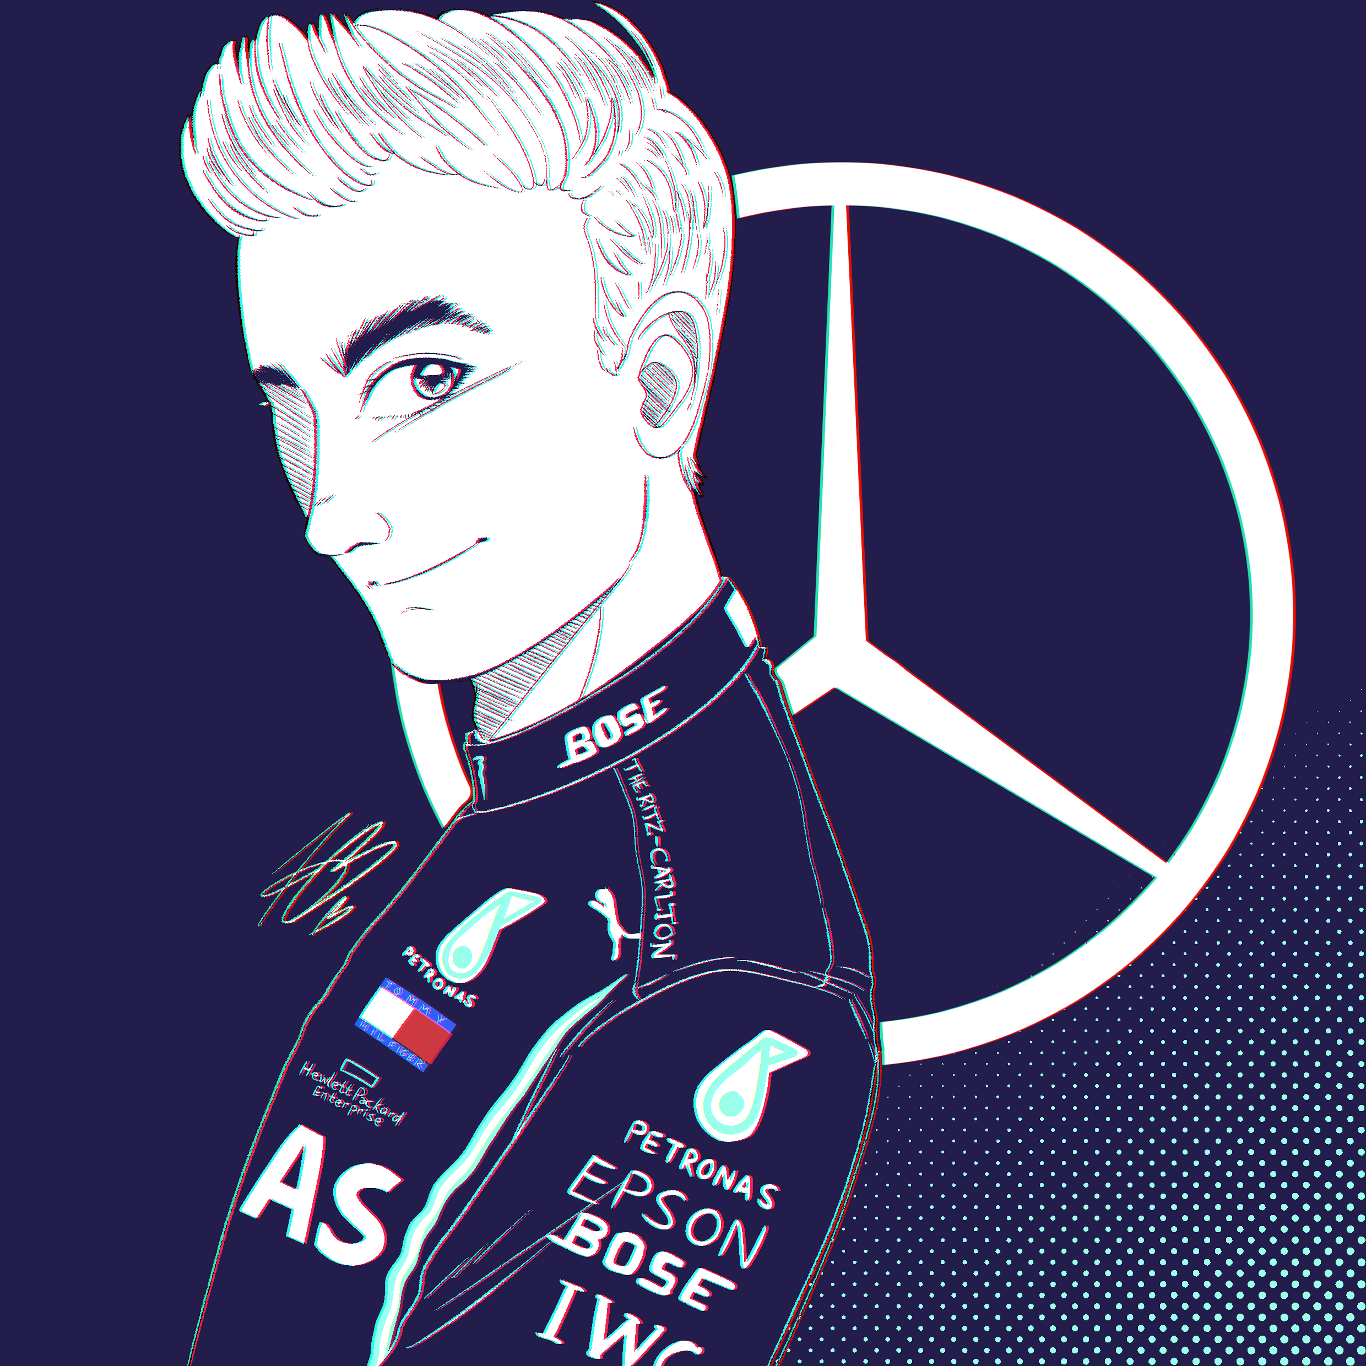 A monochromatic illustration of George Russell in his Mercedes race suit from the bust up in a side profile. He's facing the left but looking towards the viewer. Image is mostly in white and deep, navy blue. There's a half tone gradient in the background going from deep, navy blue to turquoise and a white Mercedes logo is in the background.